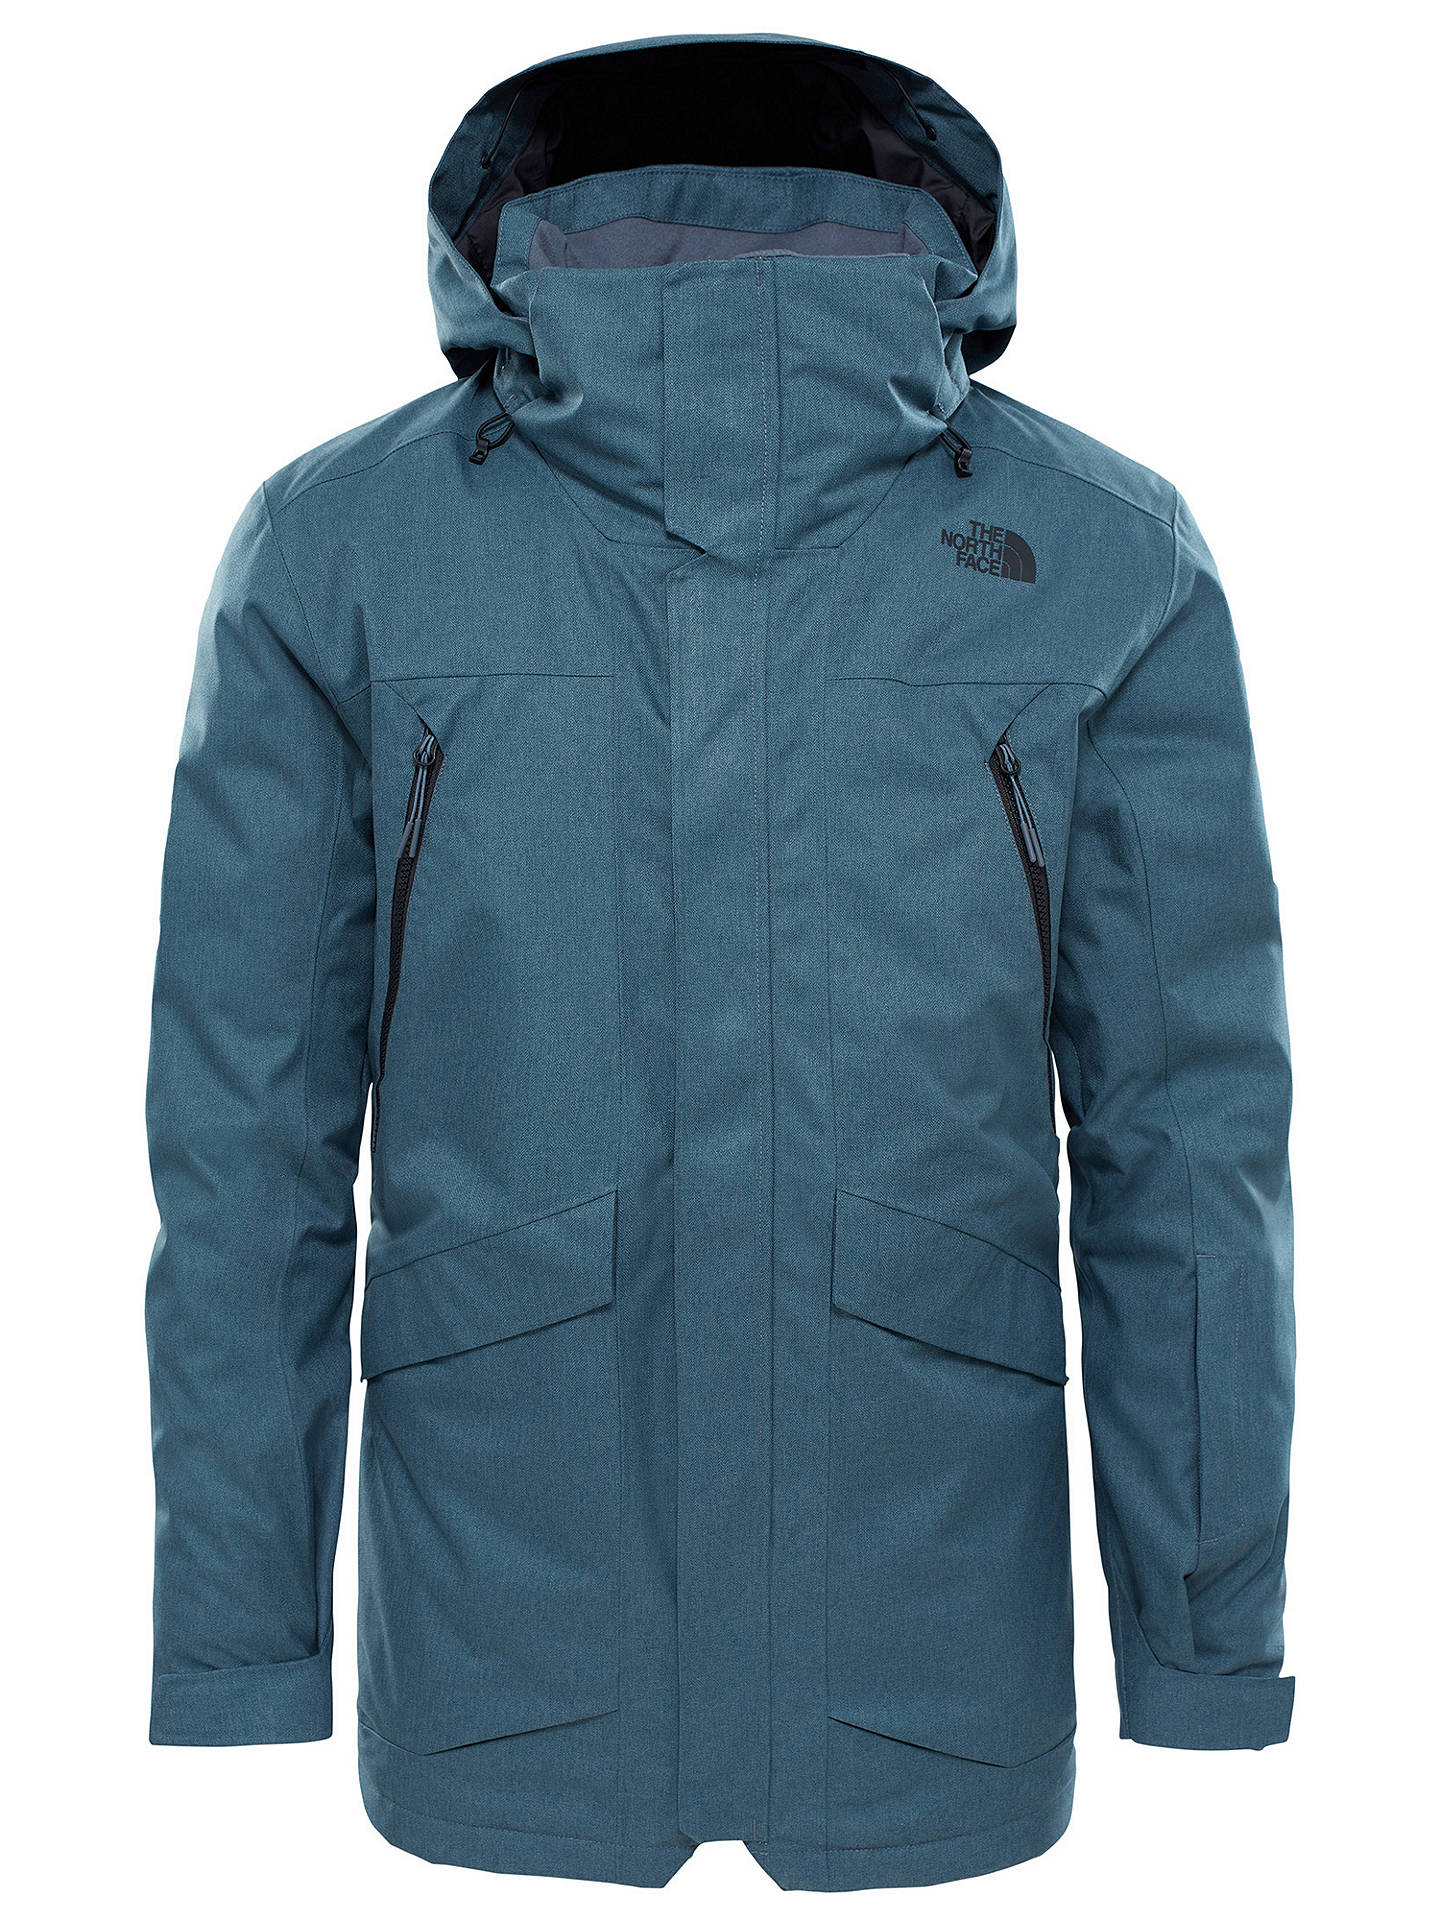 The North Face Gatekeeper Men's Waterproof Insulated Jacket, Grey at